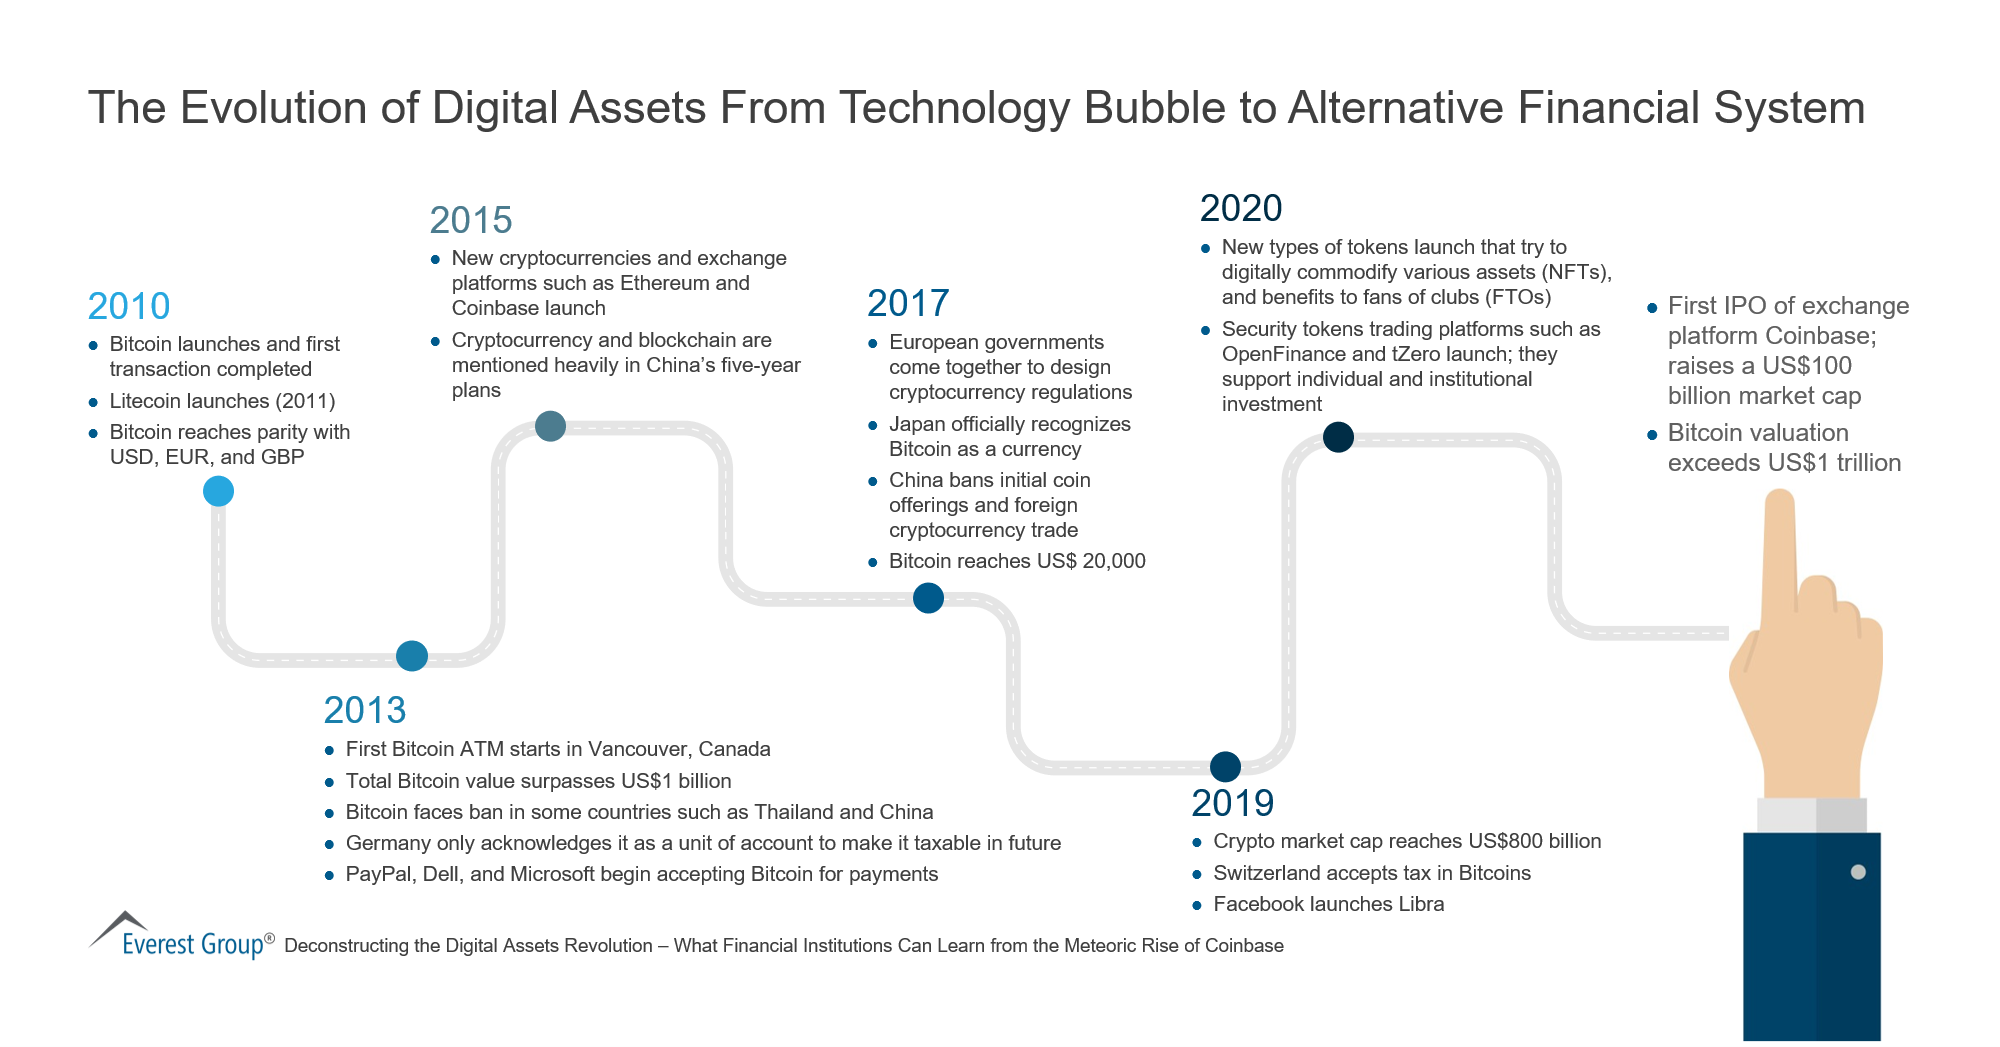 The Evolution of Digital Assets from Technology Bubble to Alternative Financial System